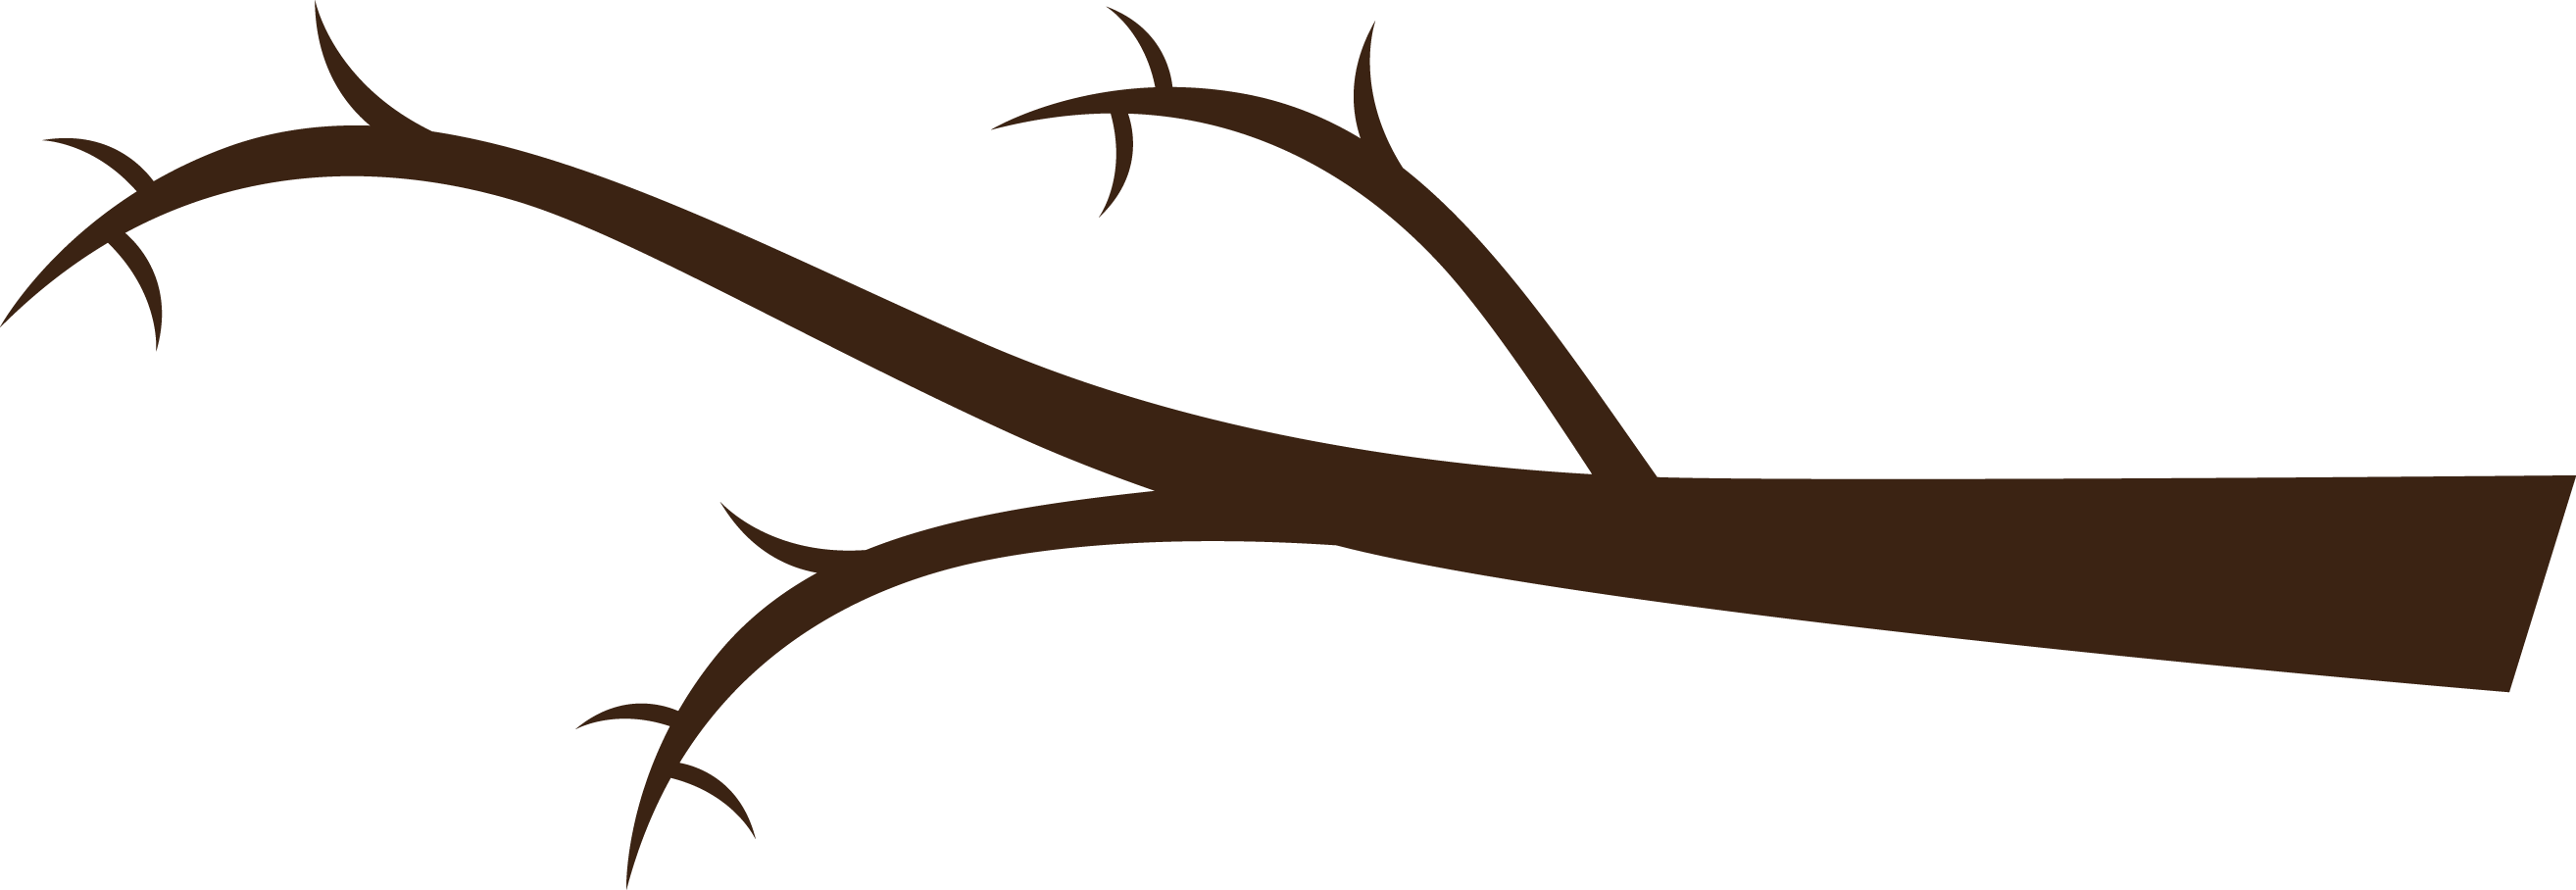 A Brown Branch With No Leaves